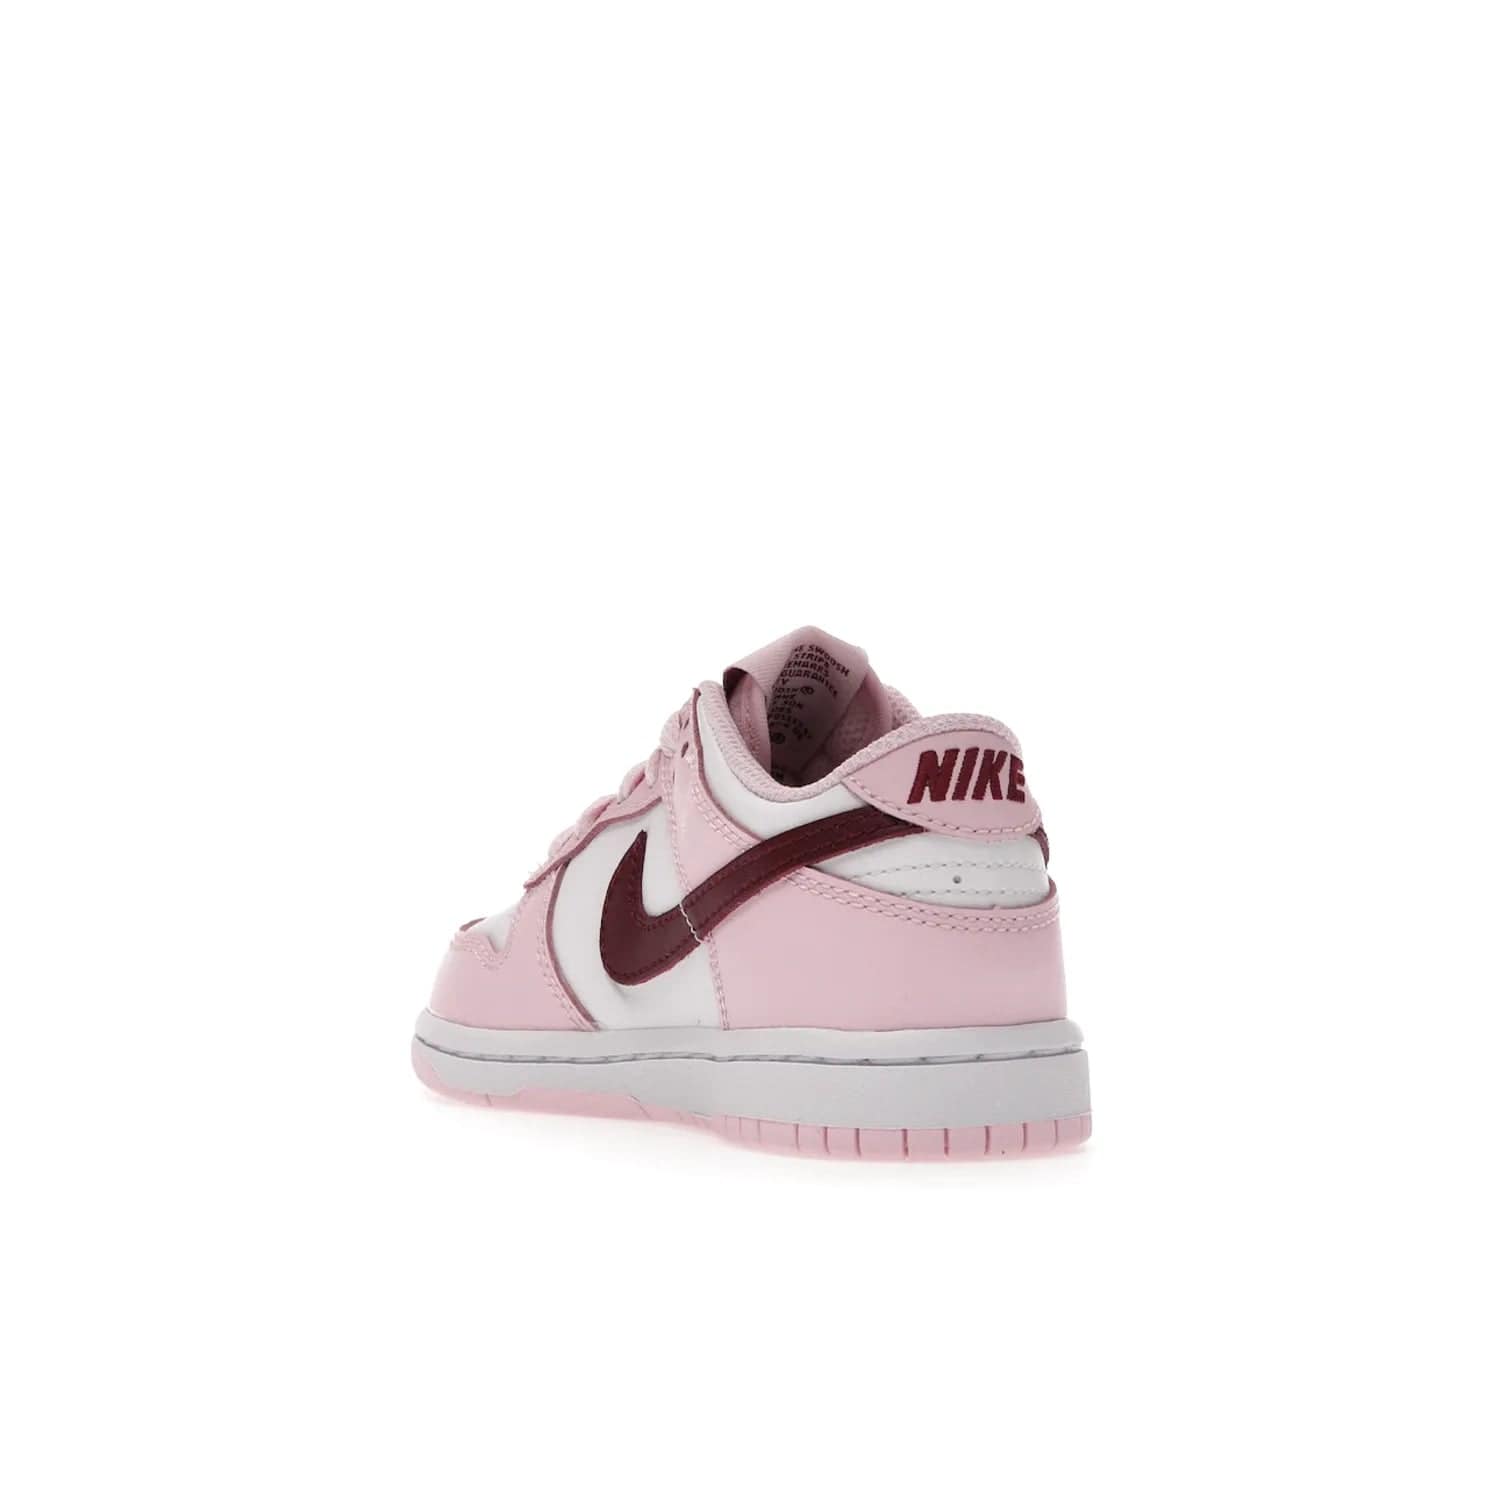 Nike Dunk Low Pink Red White (PS) - Image 25 - Only at www.BallersClubKickz.com - Introducing the Nike Dunk Low Pink Red White (PS), the perfect addition to your sneaker collection. A classic silhouette with modern vibrant colors, including a pink upper with red and white accents and a white midsole. Comfort and durability, perfect for any outfit. Limited edition, available June 22nd.